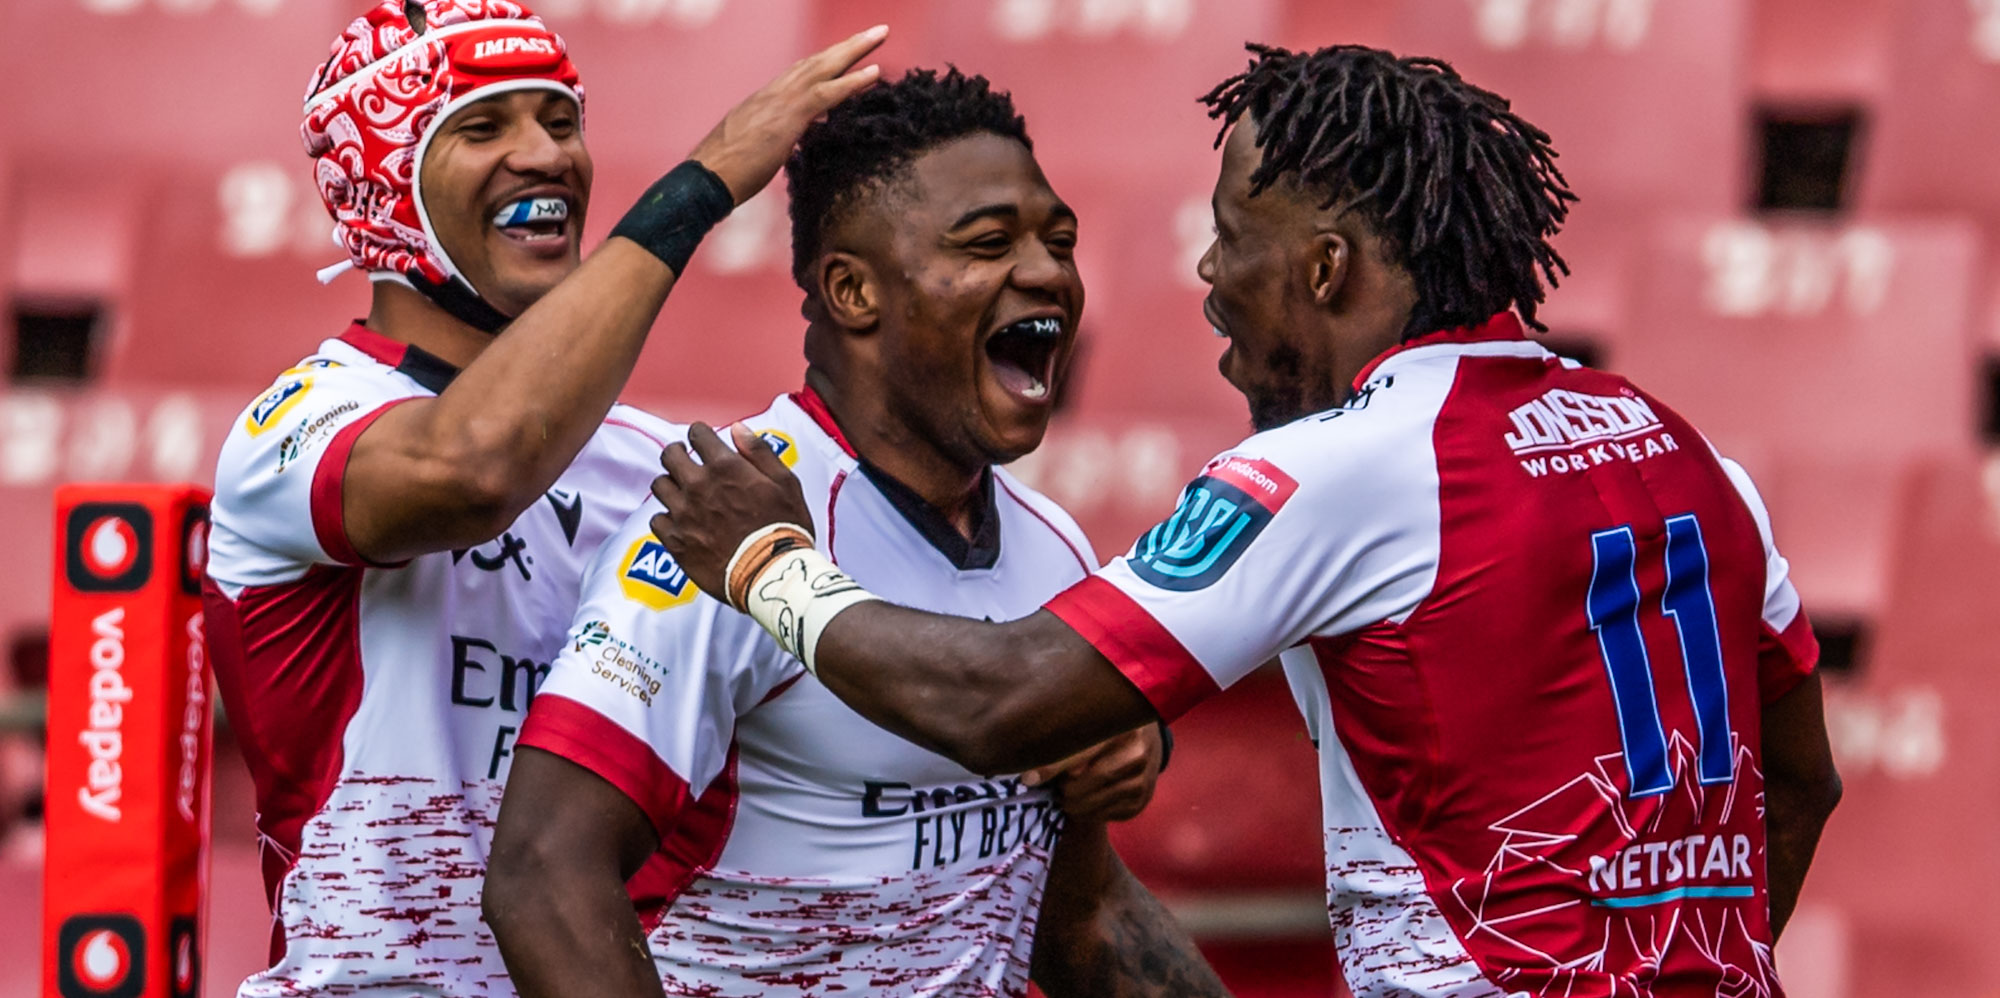 Wandisile Simelane celebrate a try with his Emirates Lions team-mates Edwill van der Merwe (left) and Rabz Maxwane (right).